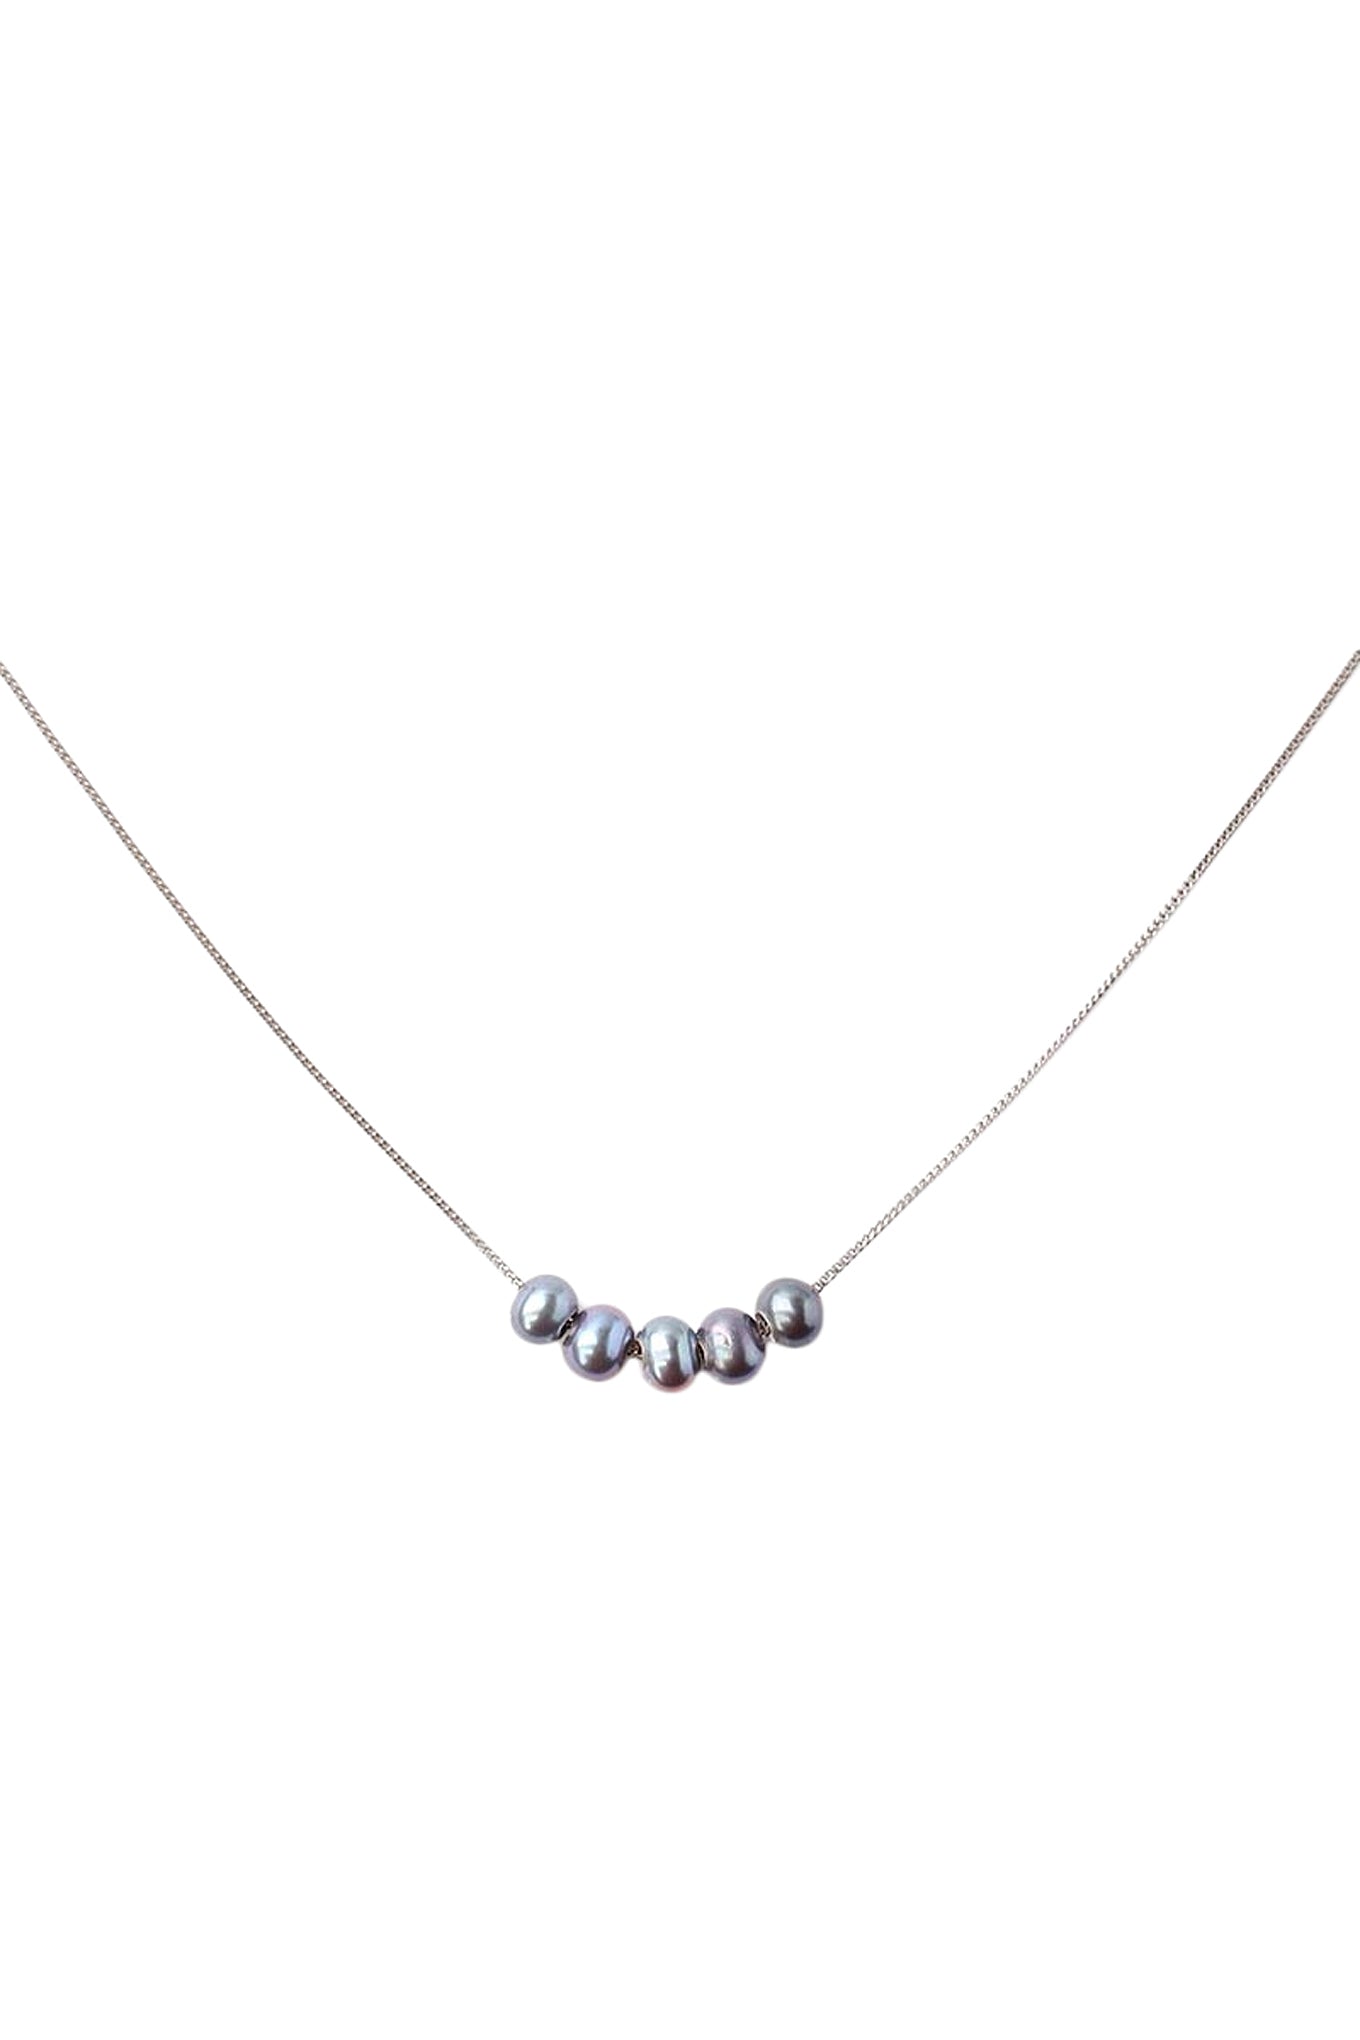 Chan Luu Peacock Floating Multi Freshwater Pearl Pendant Necklace in Silver